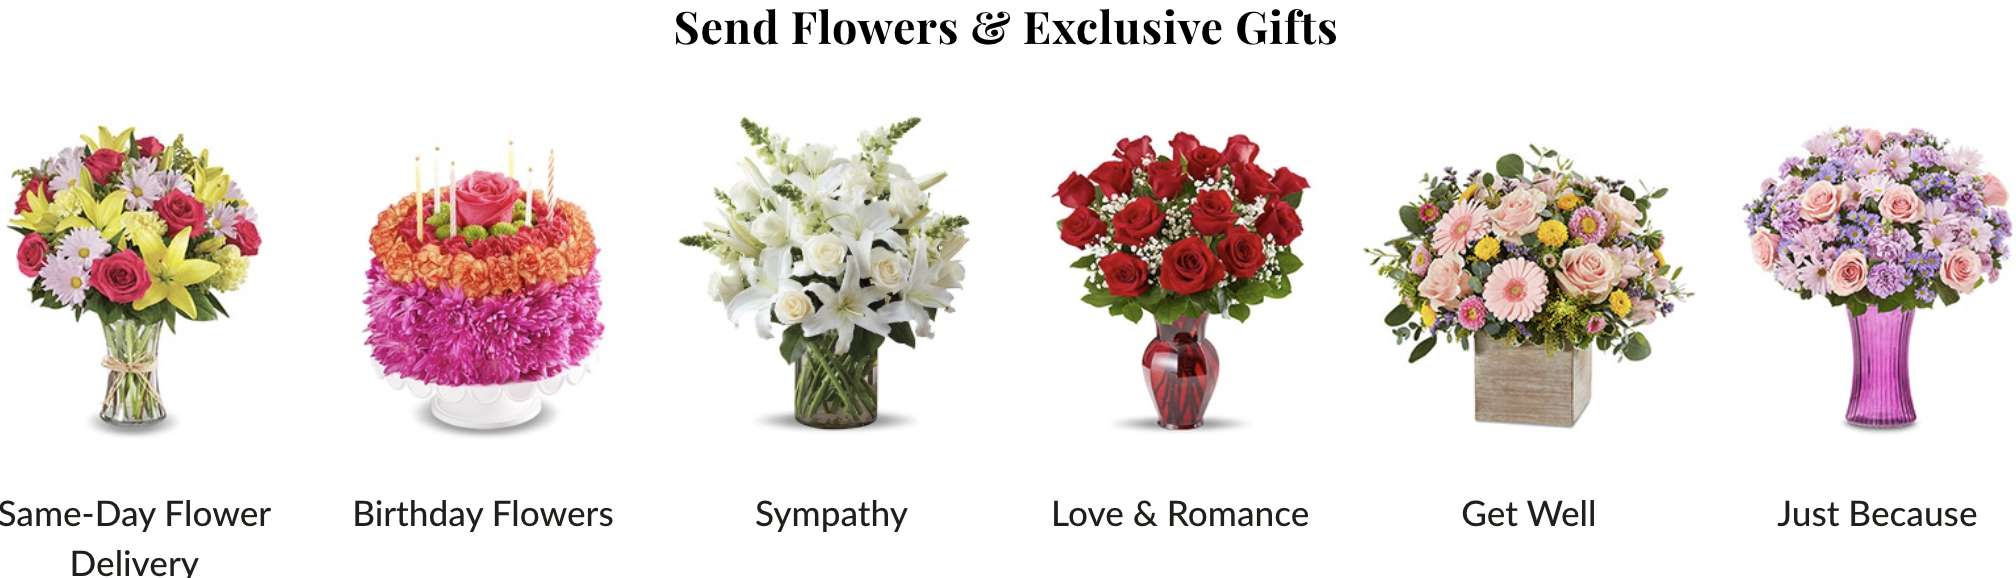 PPC landing page examples for flower company